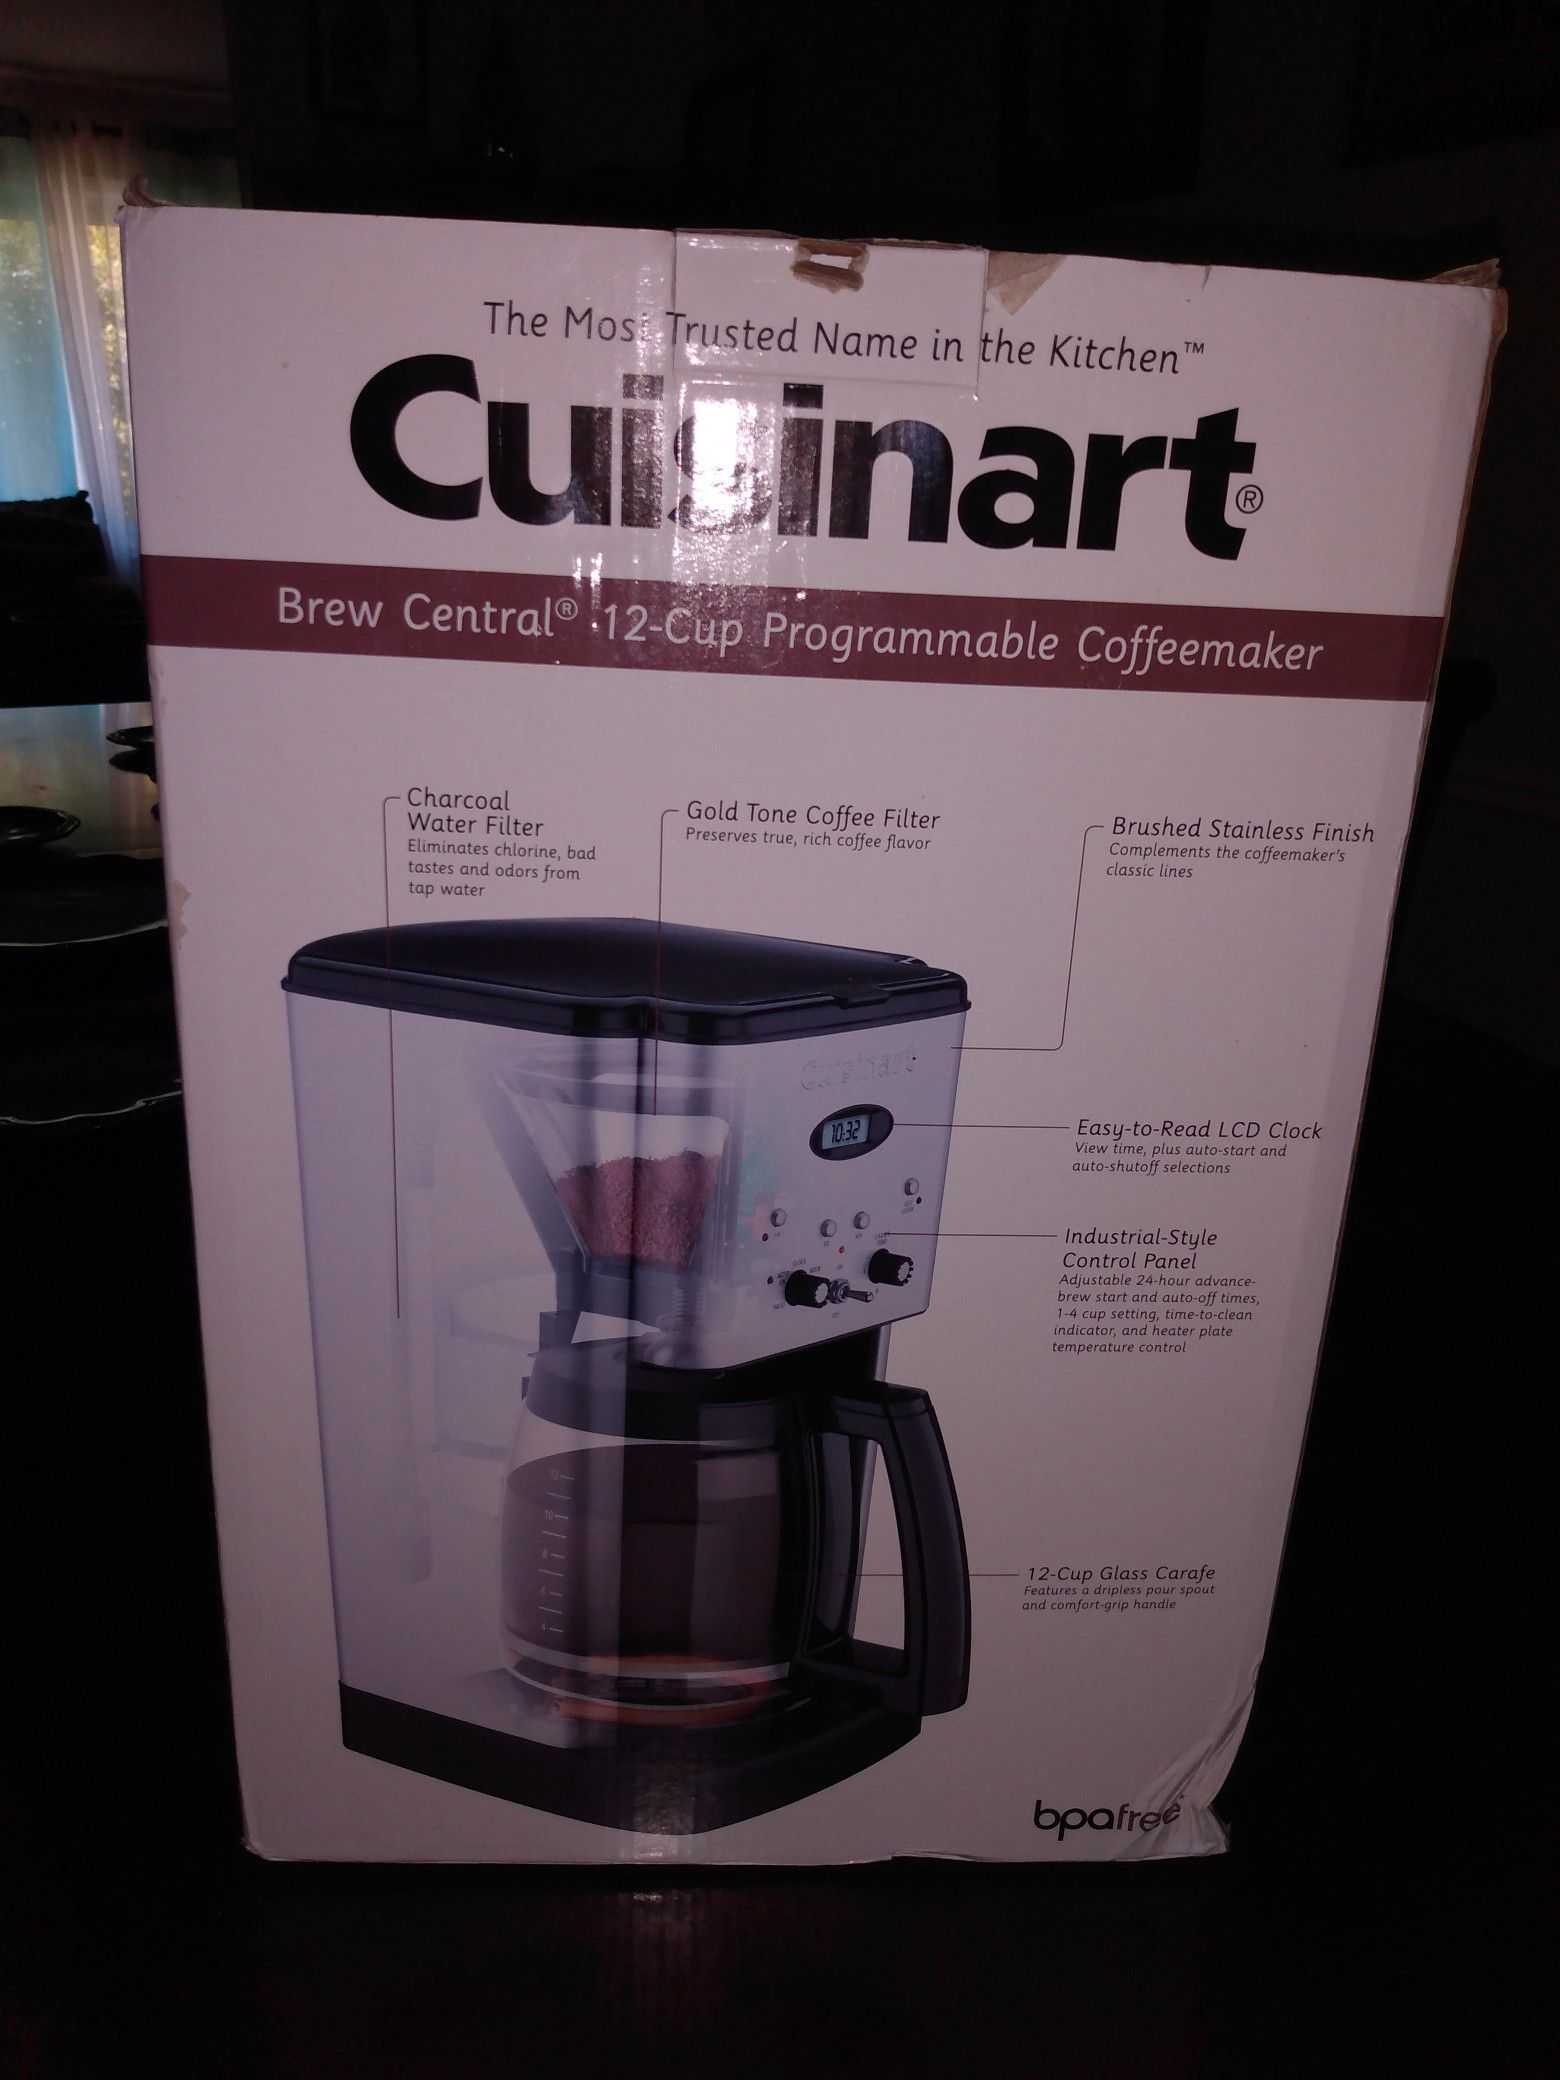 Cuisinart coffee maker brand new in box retail $150 asking only $50.